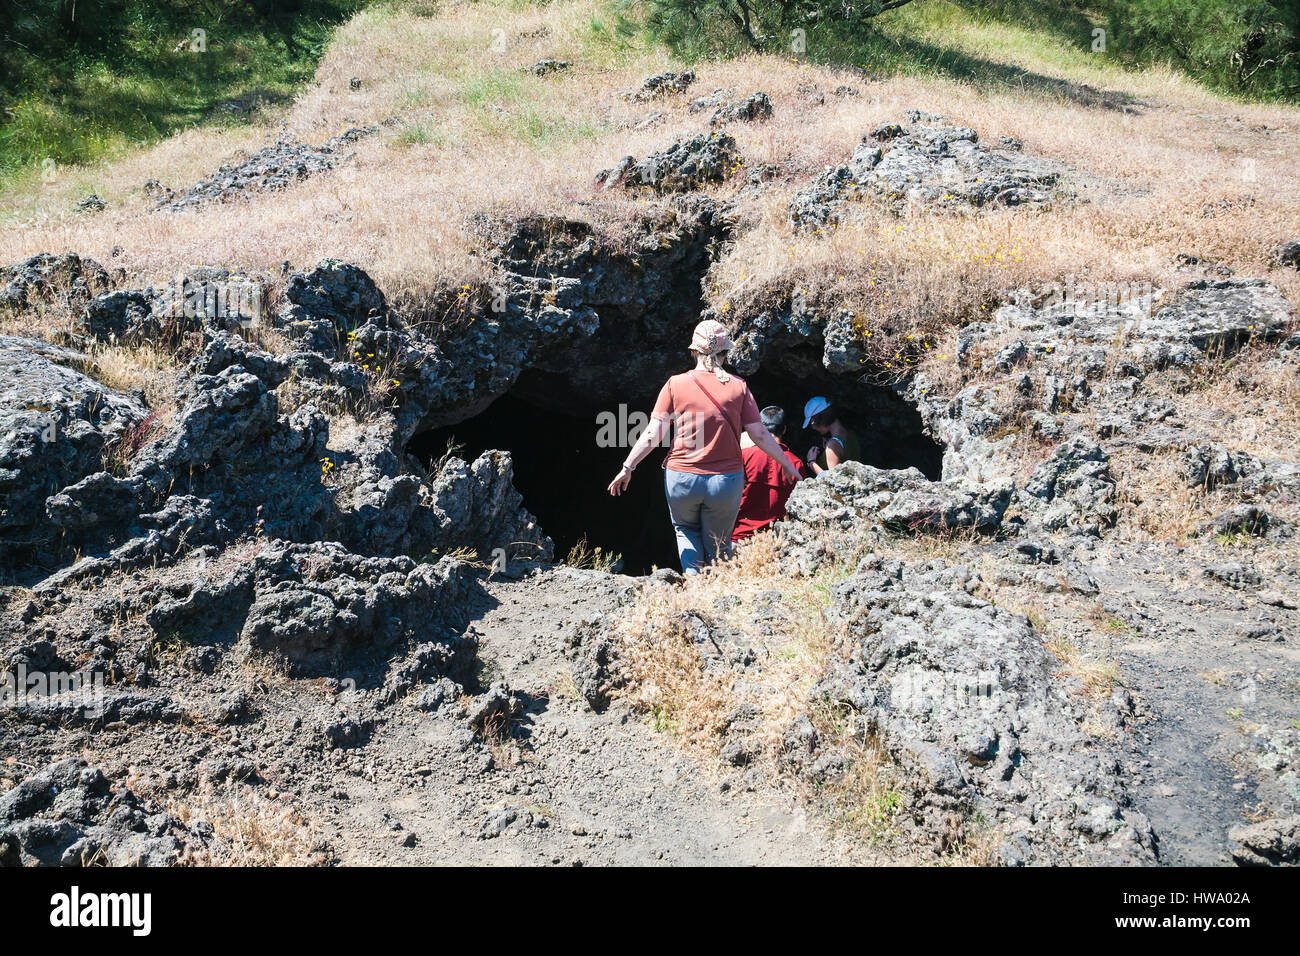 ETNA, ITALY - JULY 1, 2011 - tourists visit a cave in old crater of Etna volcano. Mount Etna is active volcano on the east coast of Sicily, the talles Stock Photo